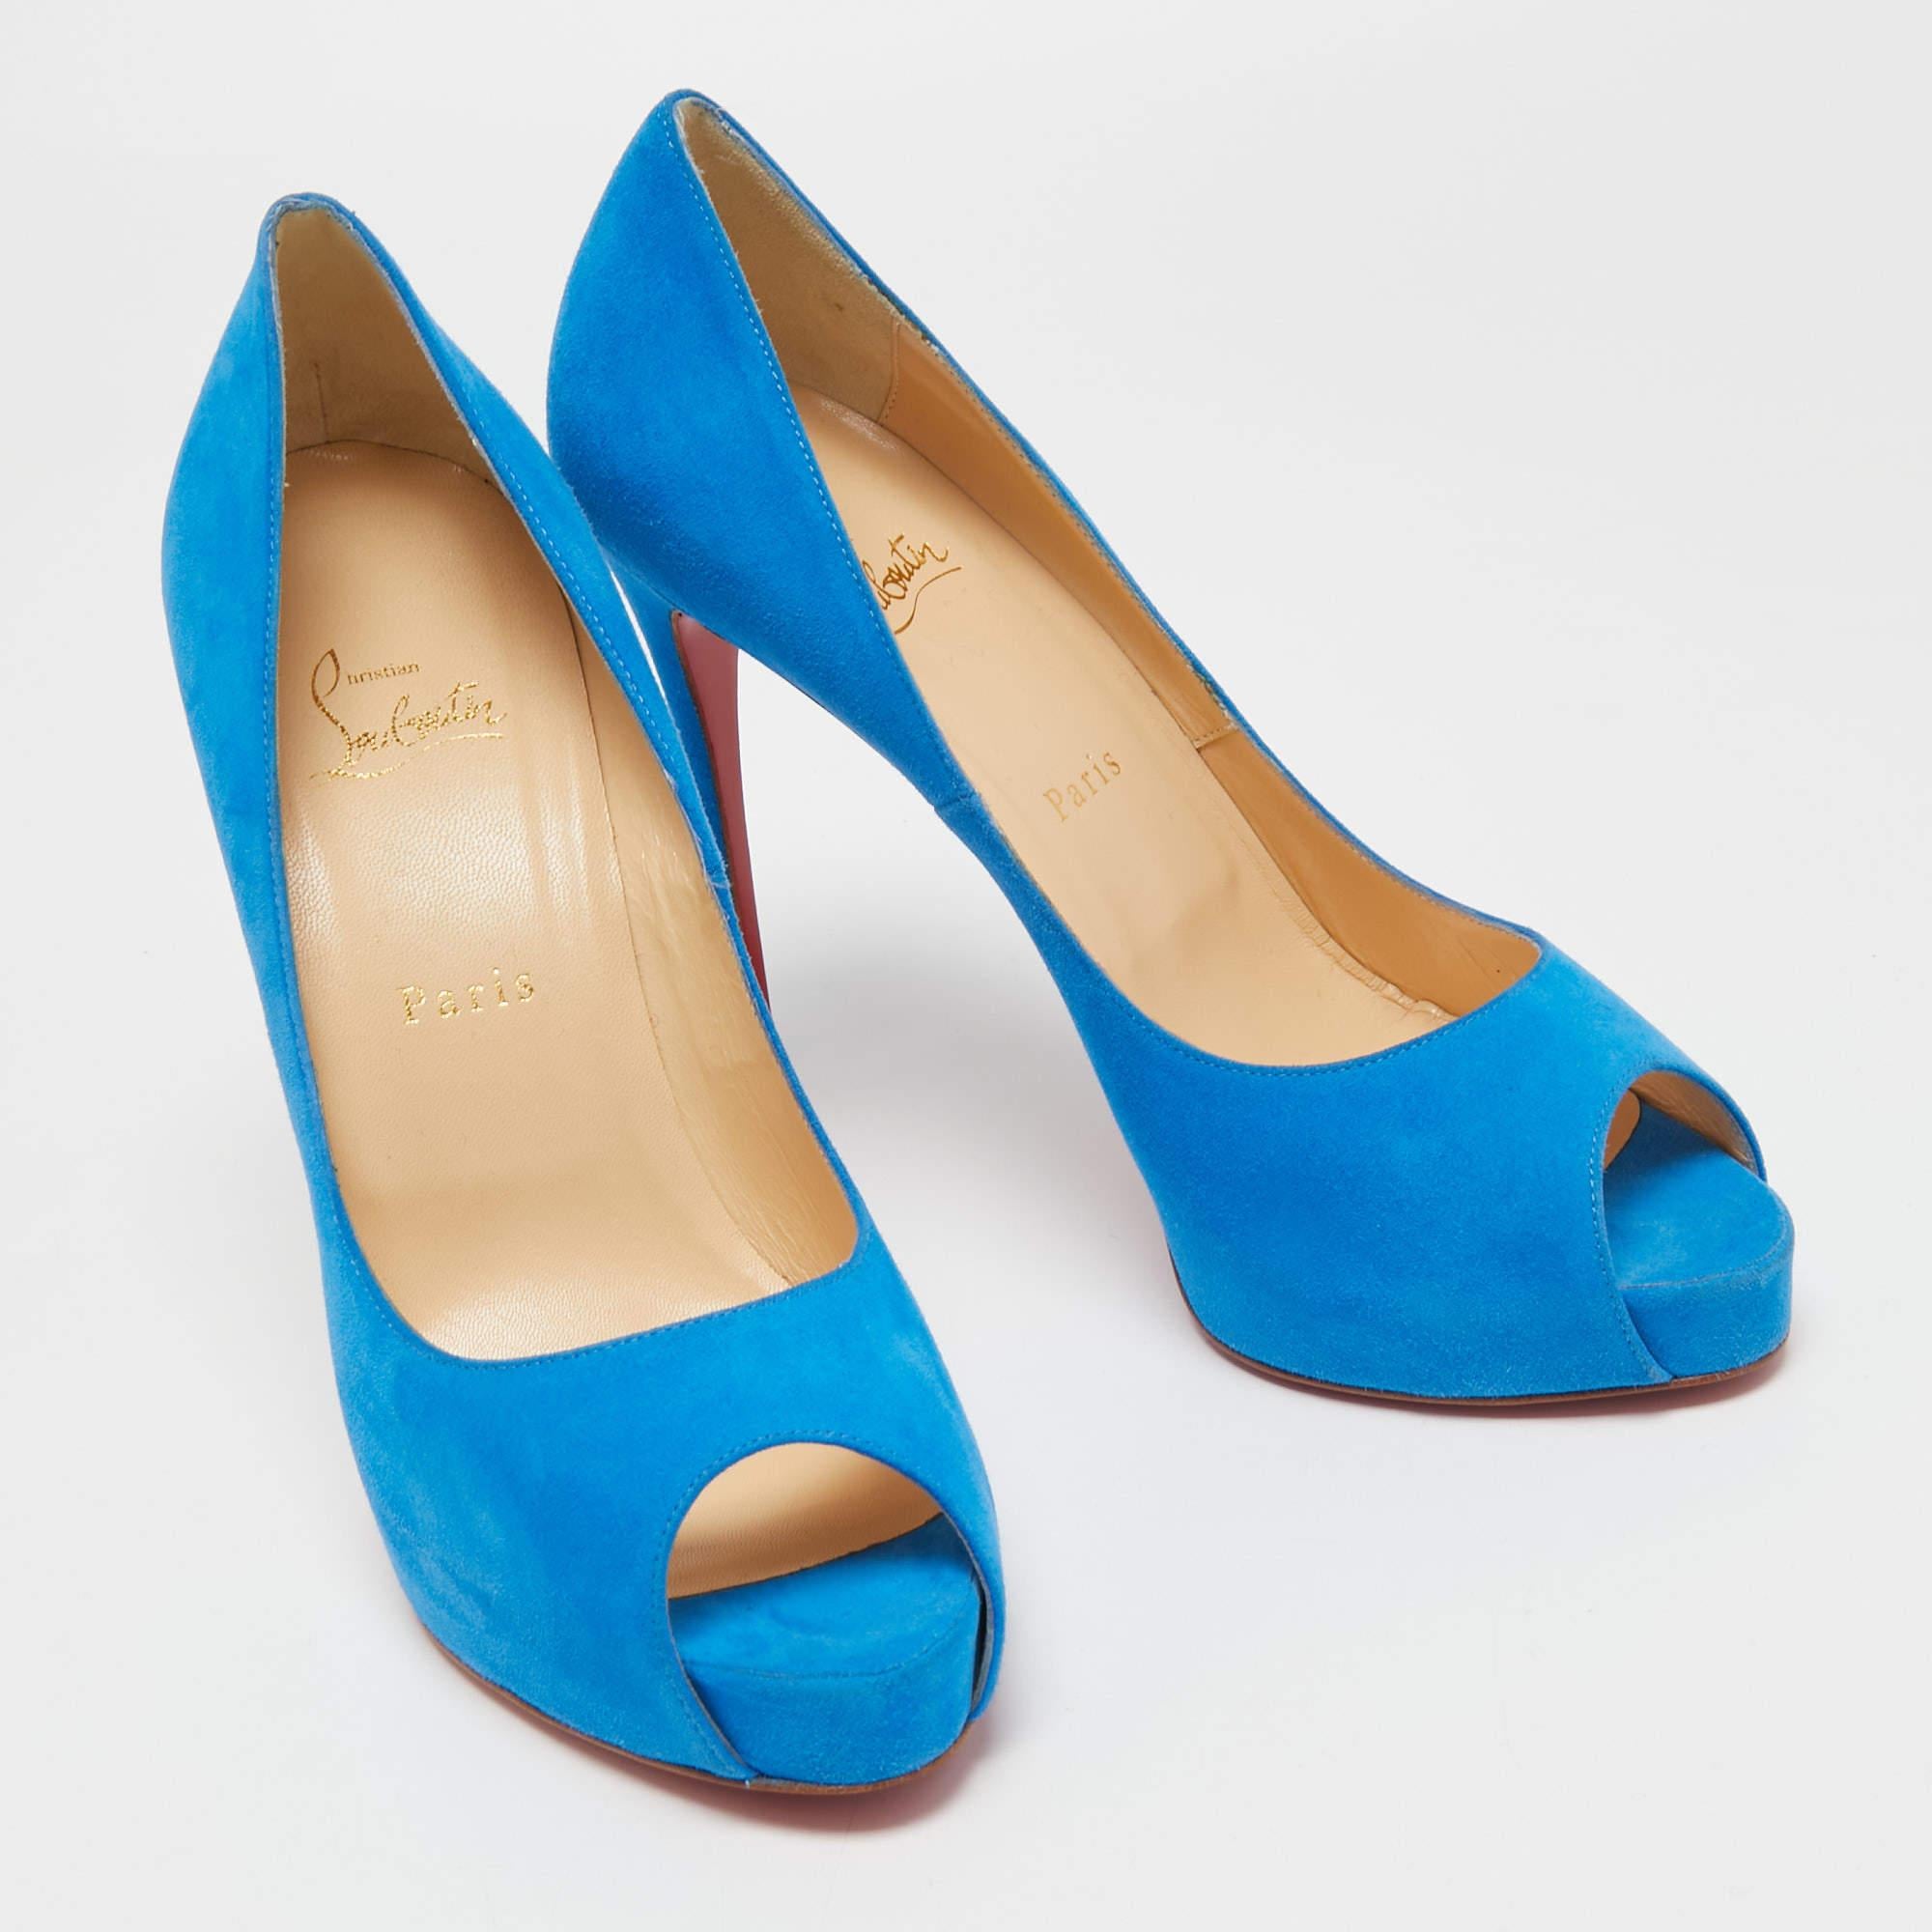 Christian Louboutin Blue Suede New Very Prive Pumps Size 40.5 1